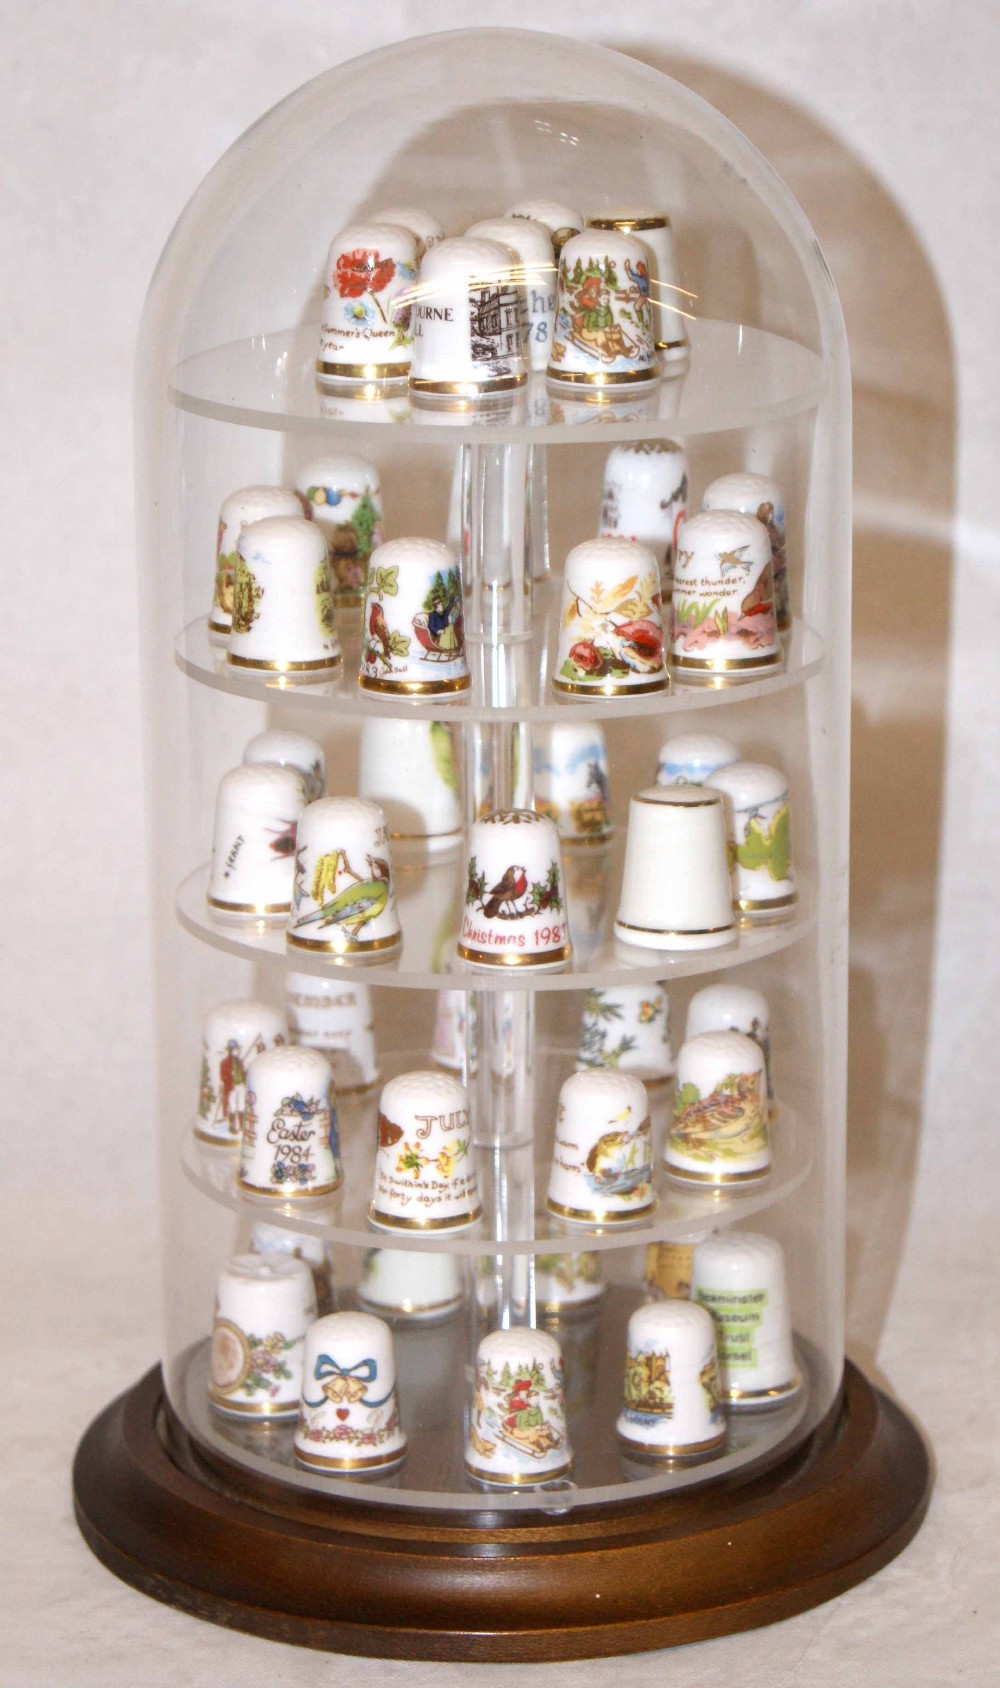 Collection of ceramic thimbles, together with display stand and glass dome.